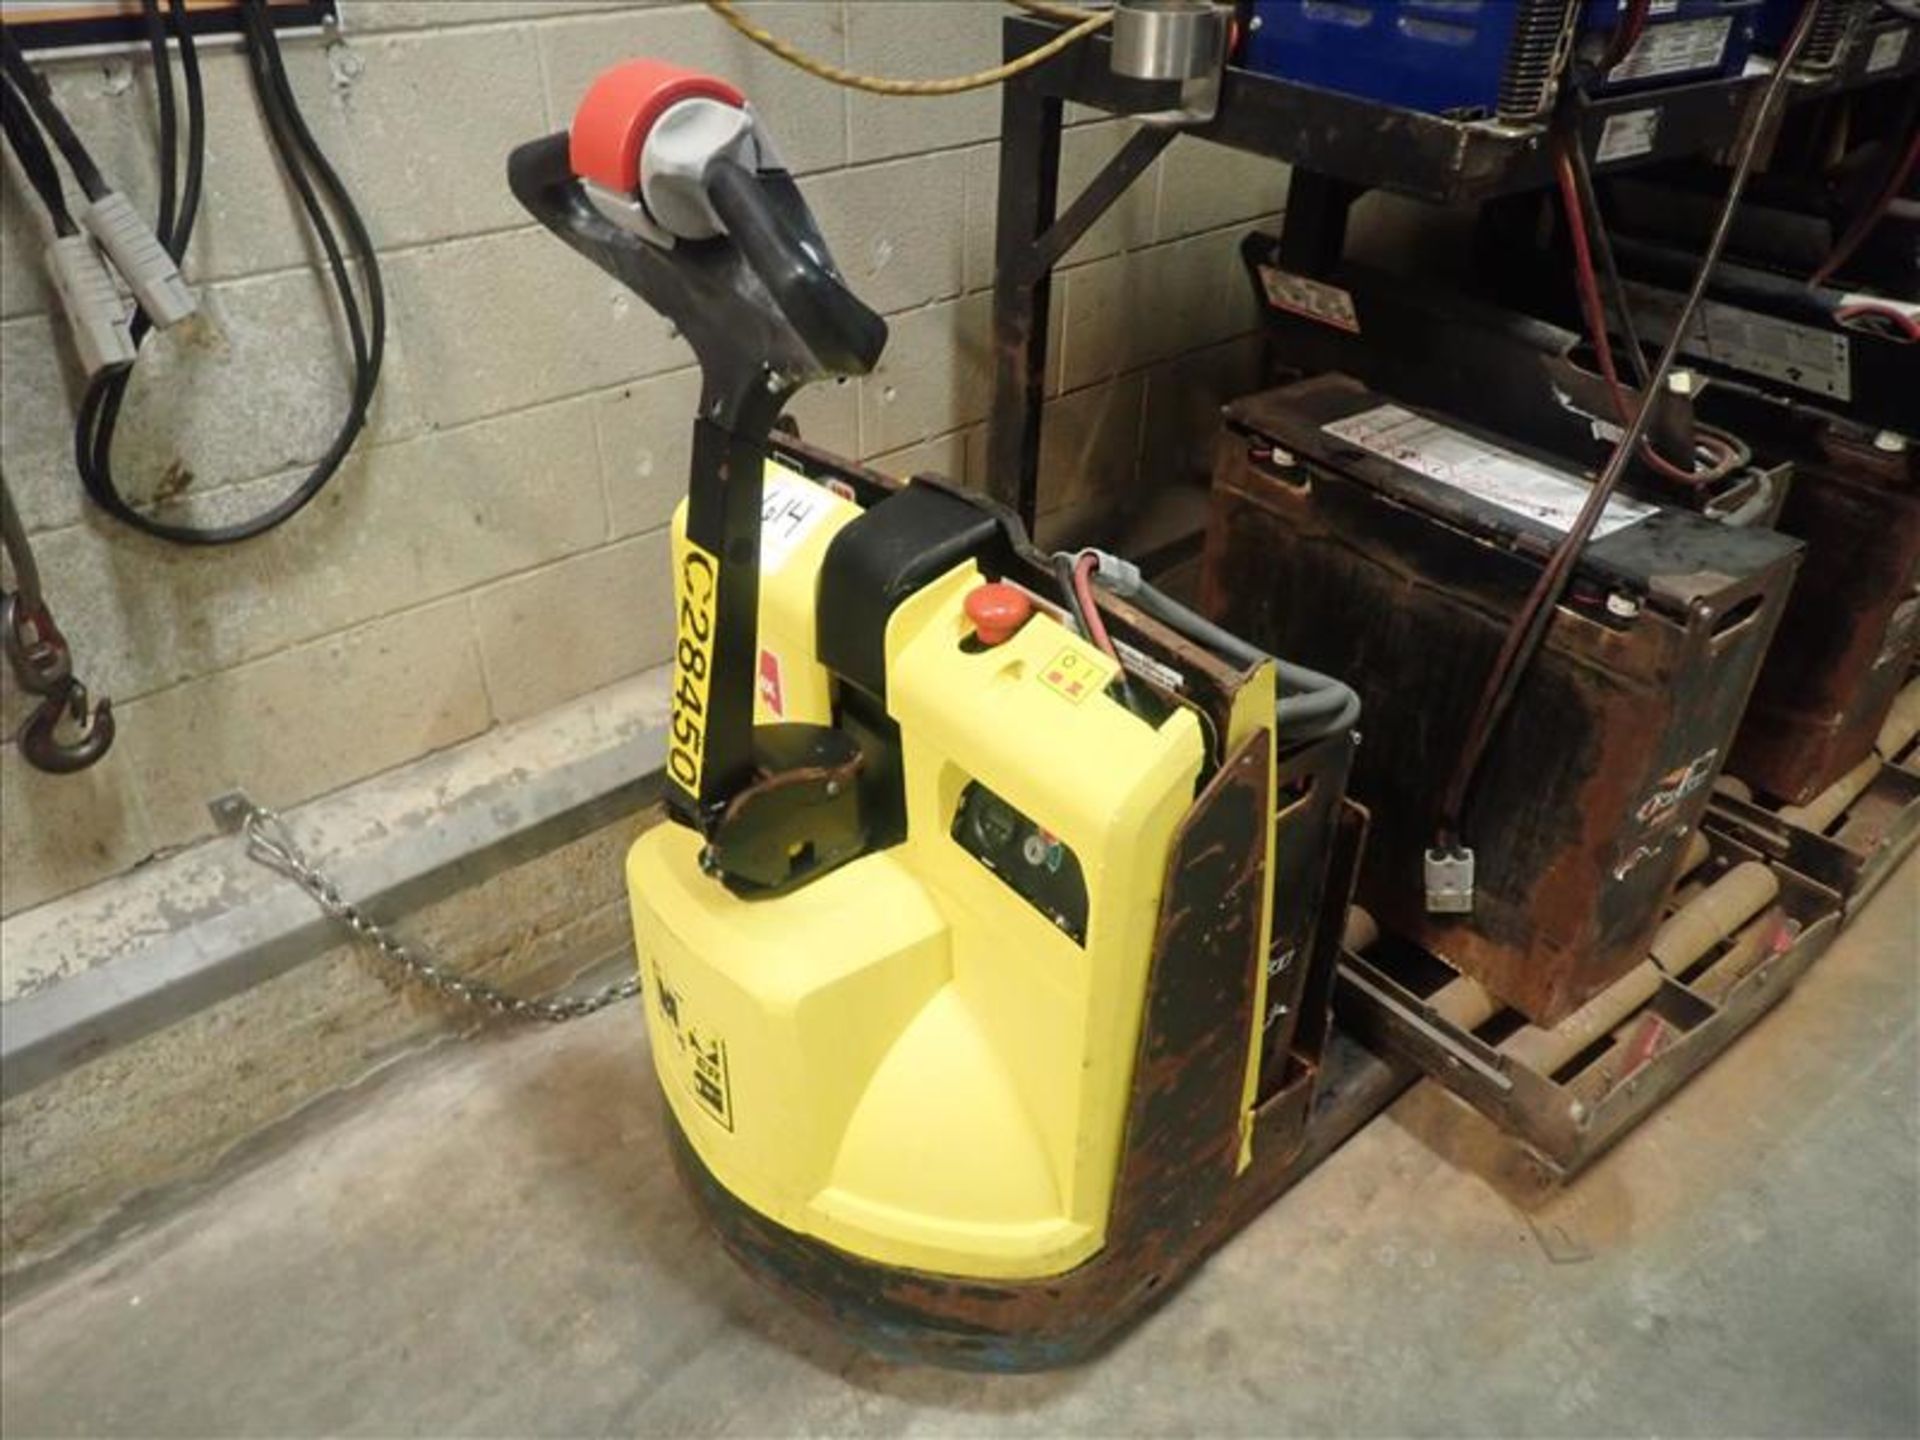 Hyster walk-behind pallet truck, mod. W45ZHD,4500 lbs. cap., 24V (charger sold separately), no.